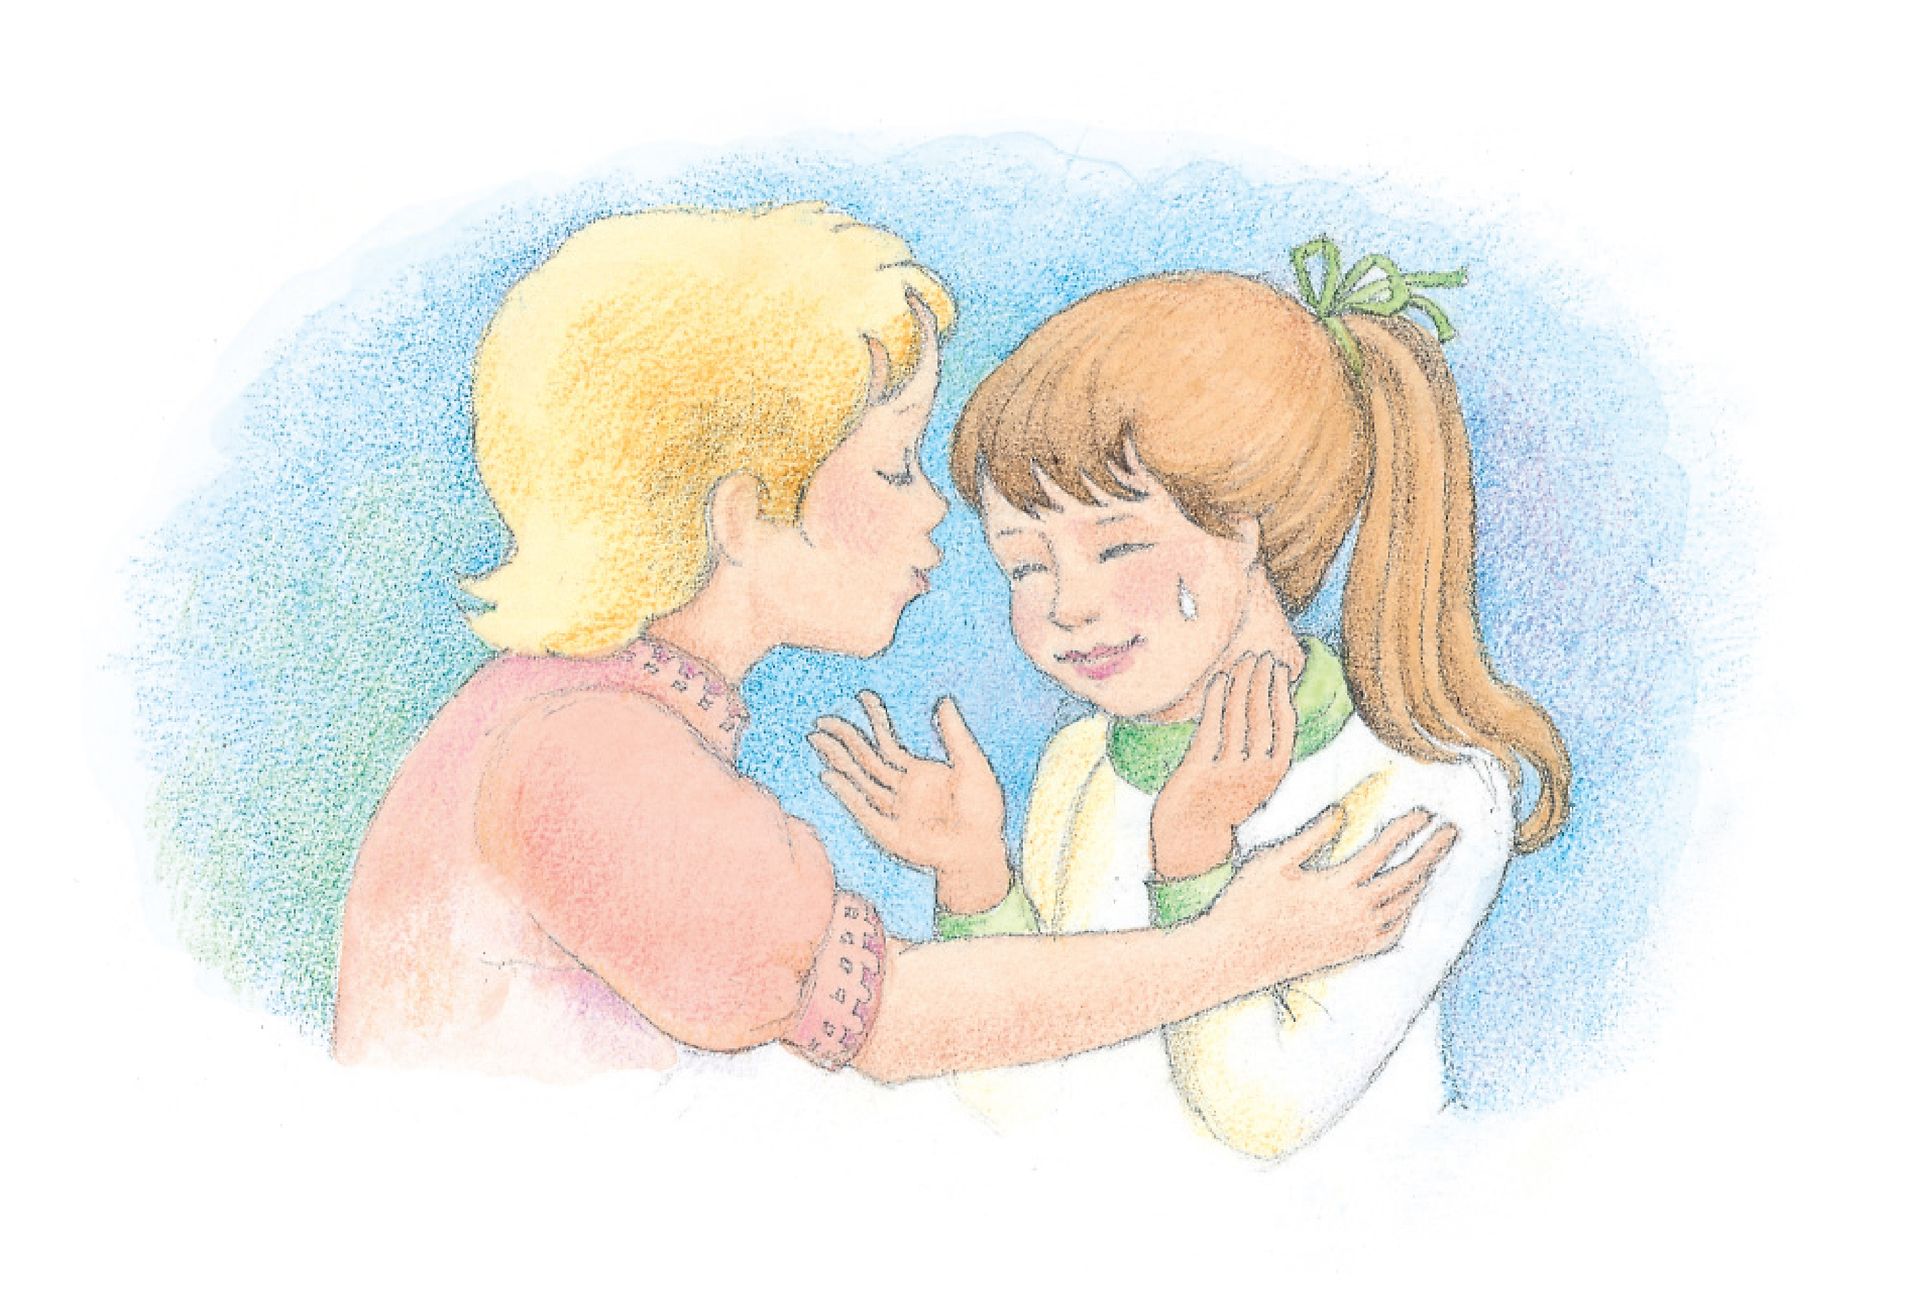 A boy comforts and forgives a crying girl who is offering an apology. From the Children’s Songbook, page 99, “Help Me, Dear Father”; watercolor illustration by Phyllis Luch.